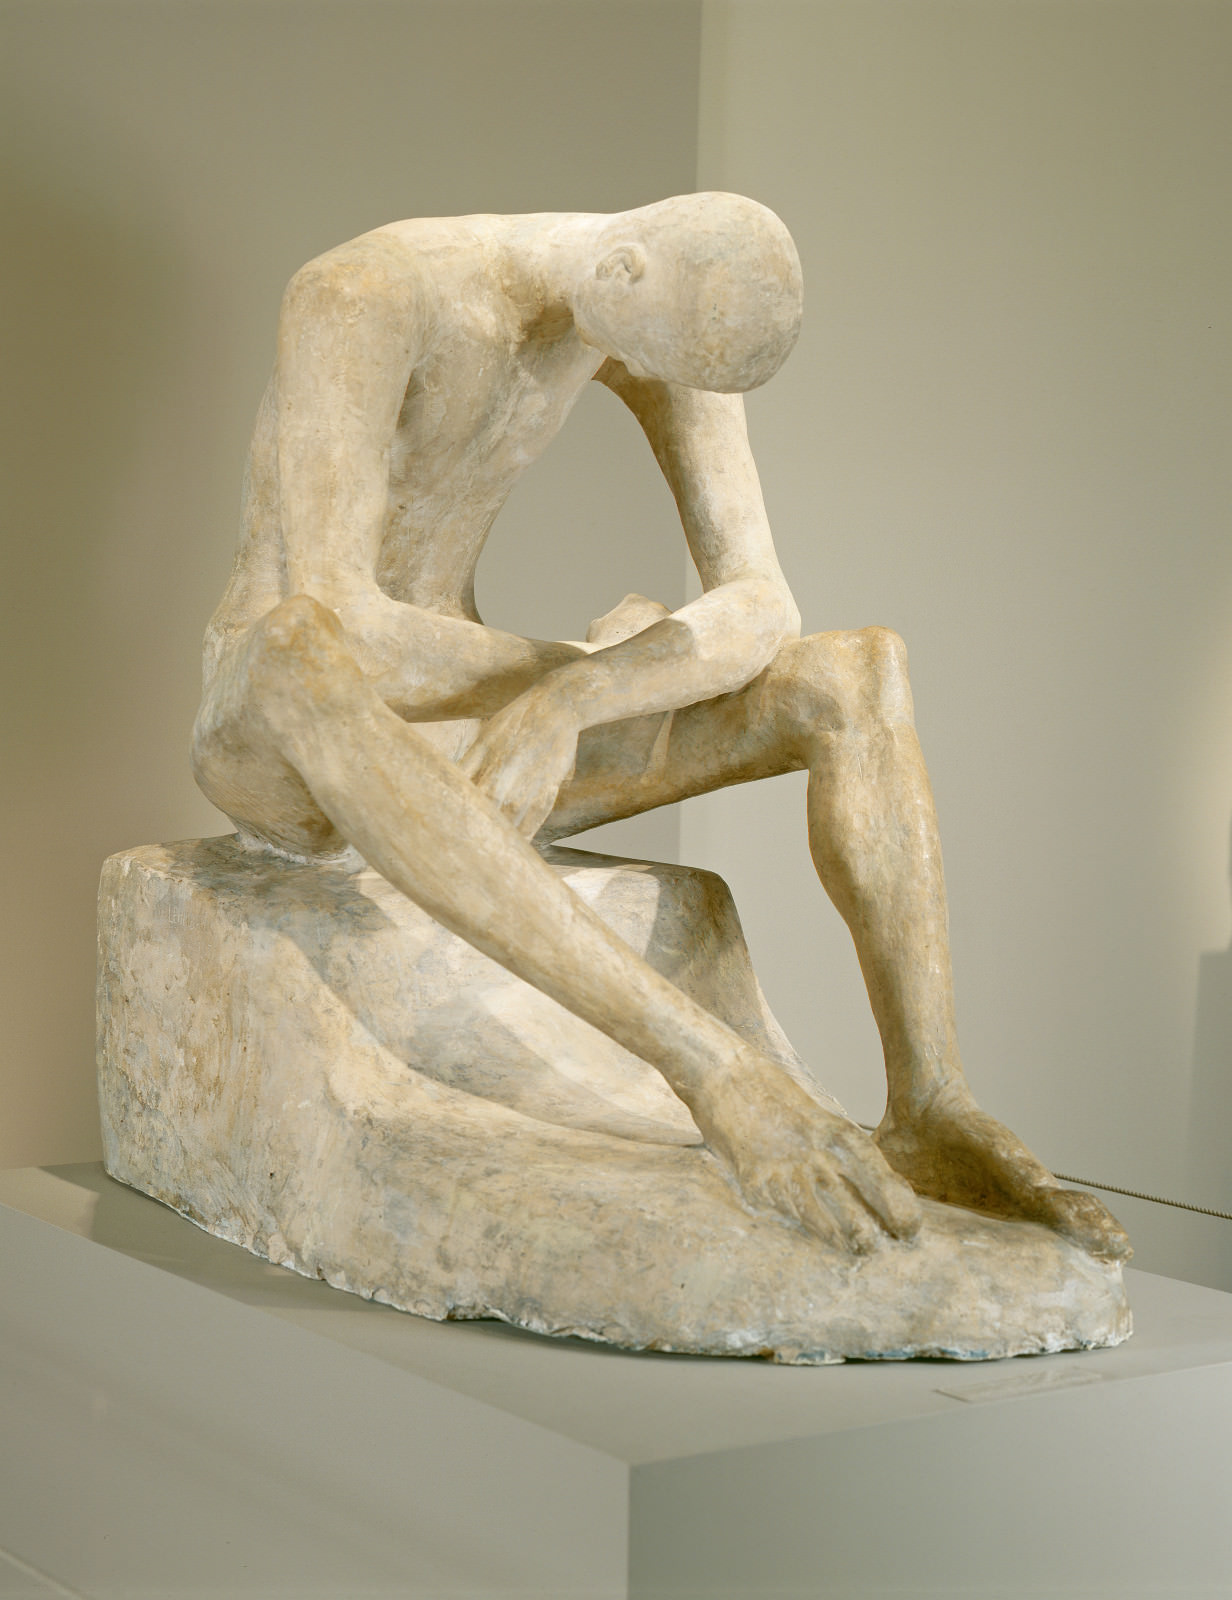 Fig. 2 – Seated Youth, Wilhelm Lehmbruck, 1917, composite tinted plaster, 103.2 x 76.2 x 115.5 cm. National Gallery of Art, Washington. Andrew W. Mellon Fund.